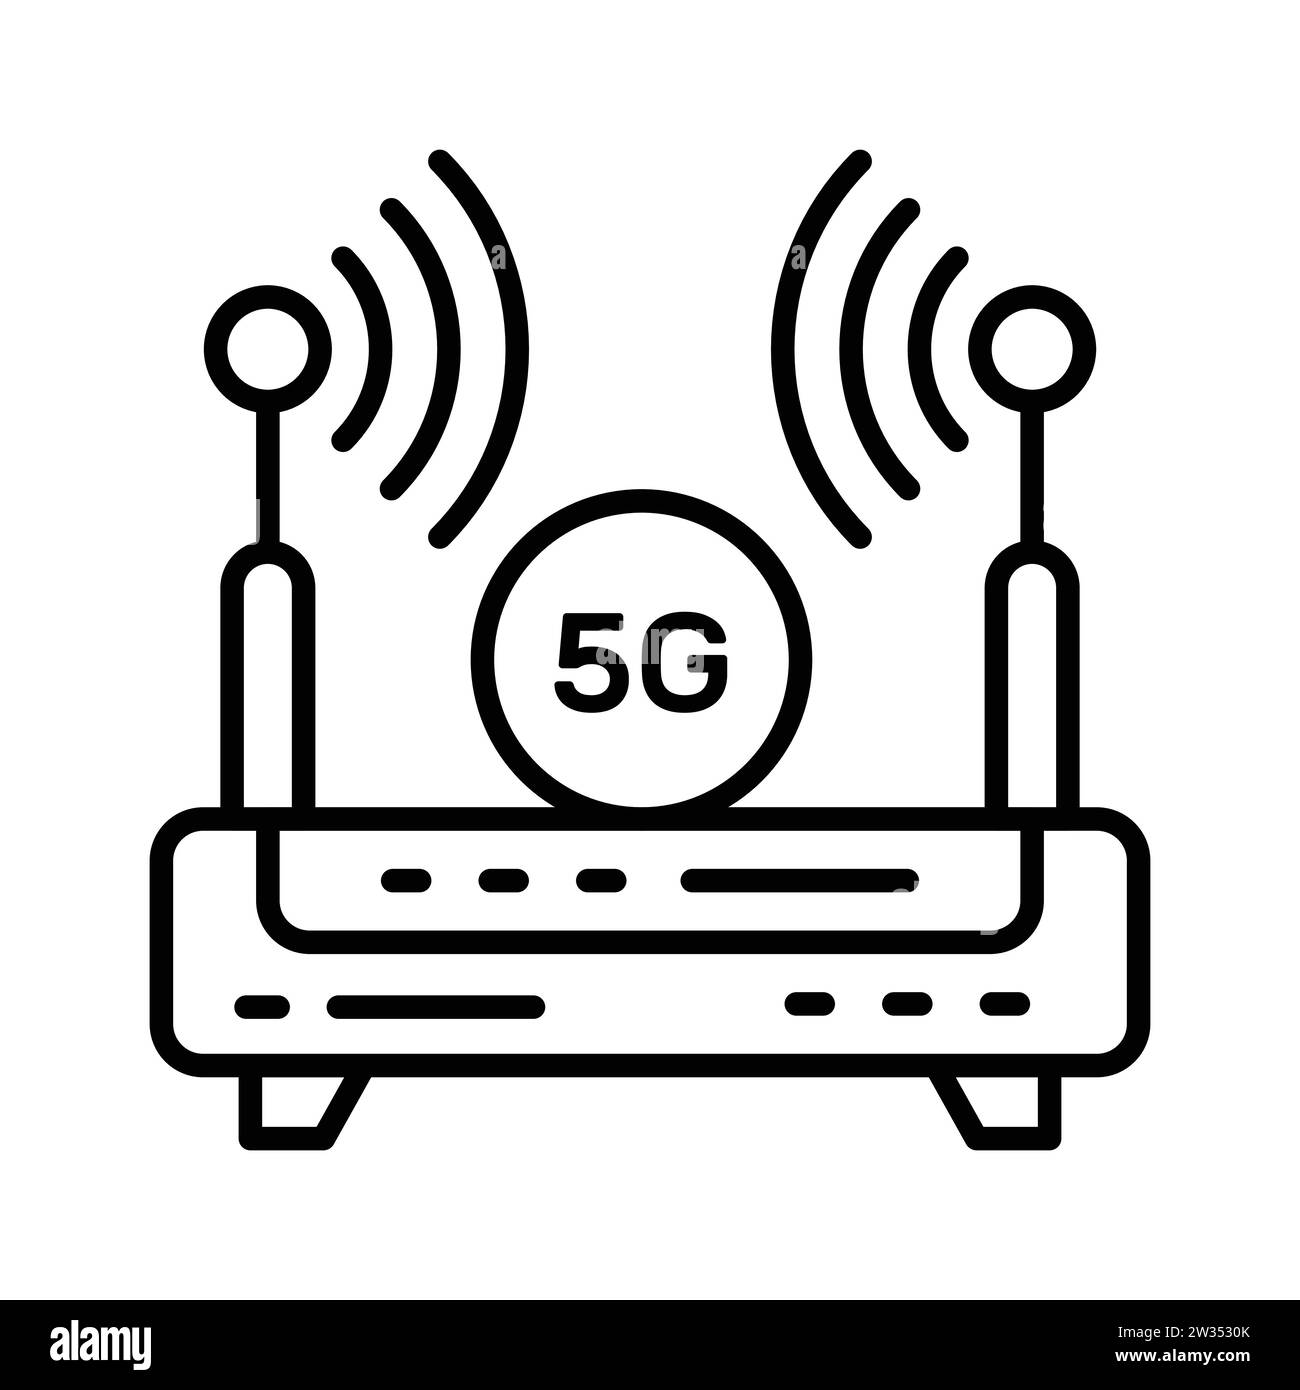 Wifi router with 5G internet signals denoting concept icon of 5G internet signals Stock Vector